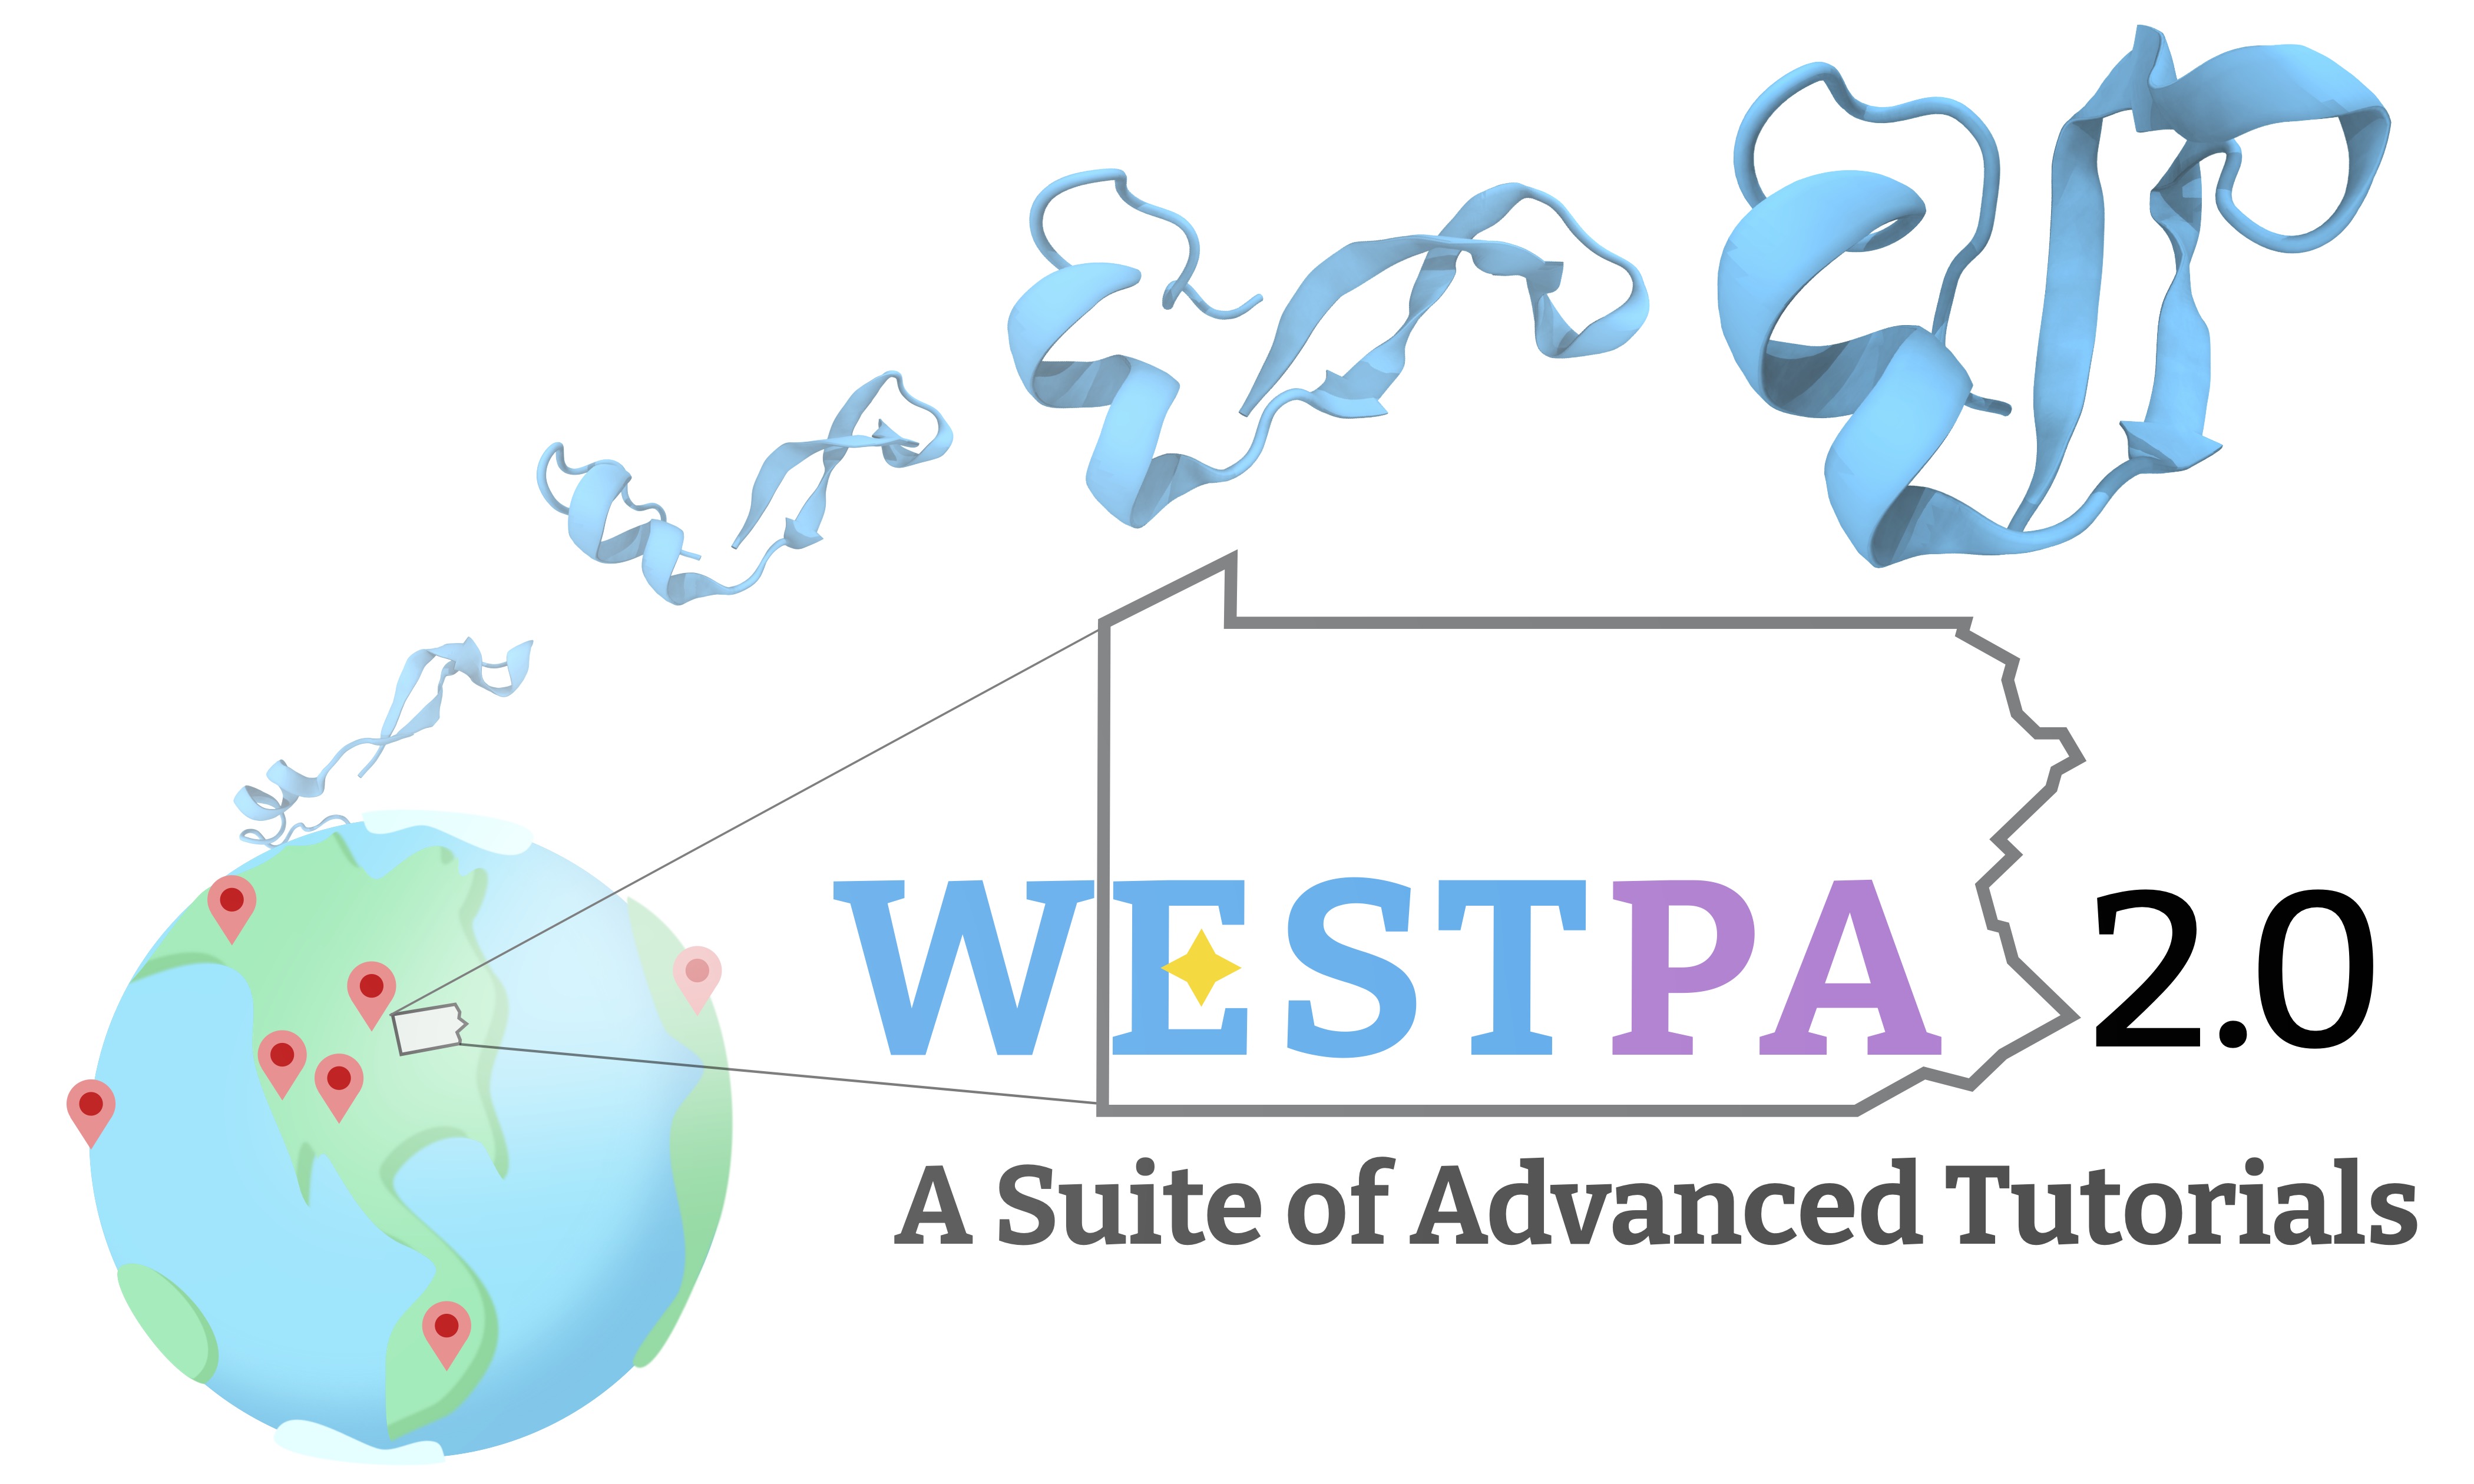 A schematic of Westpa usage around the world, with a folding protein